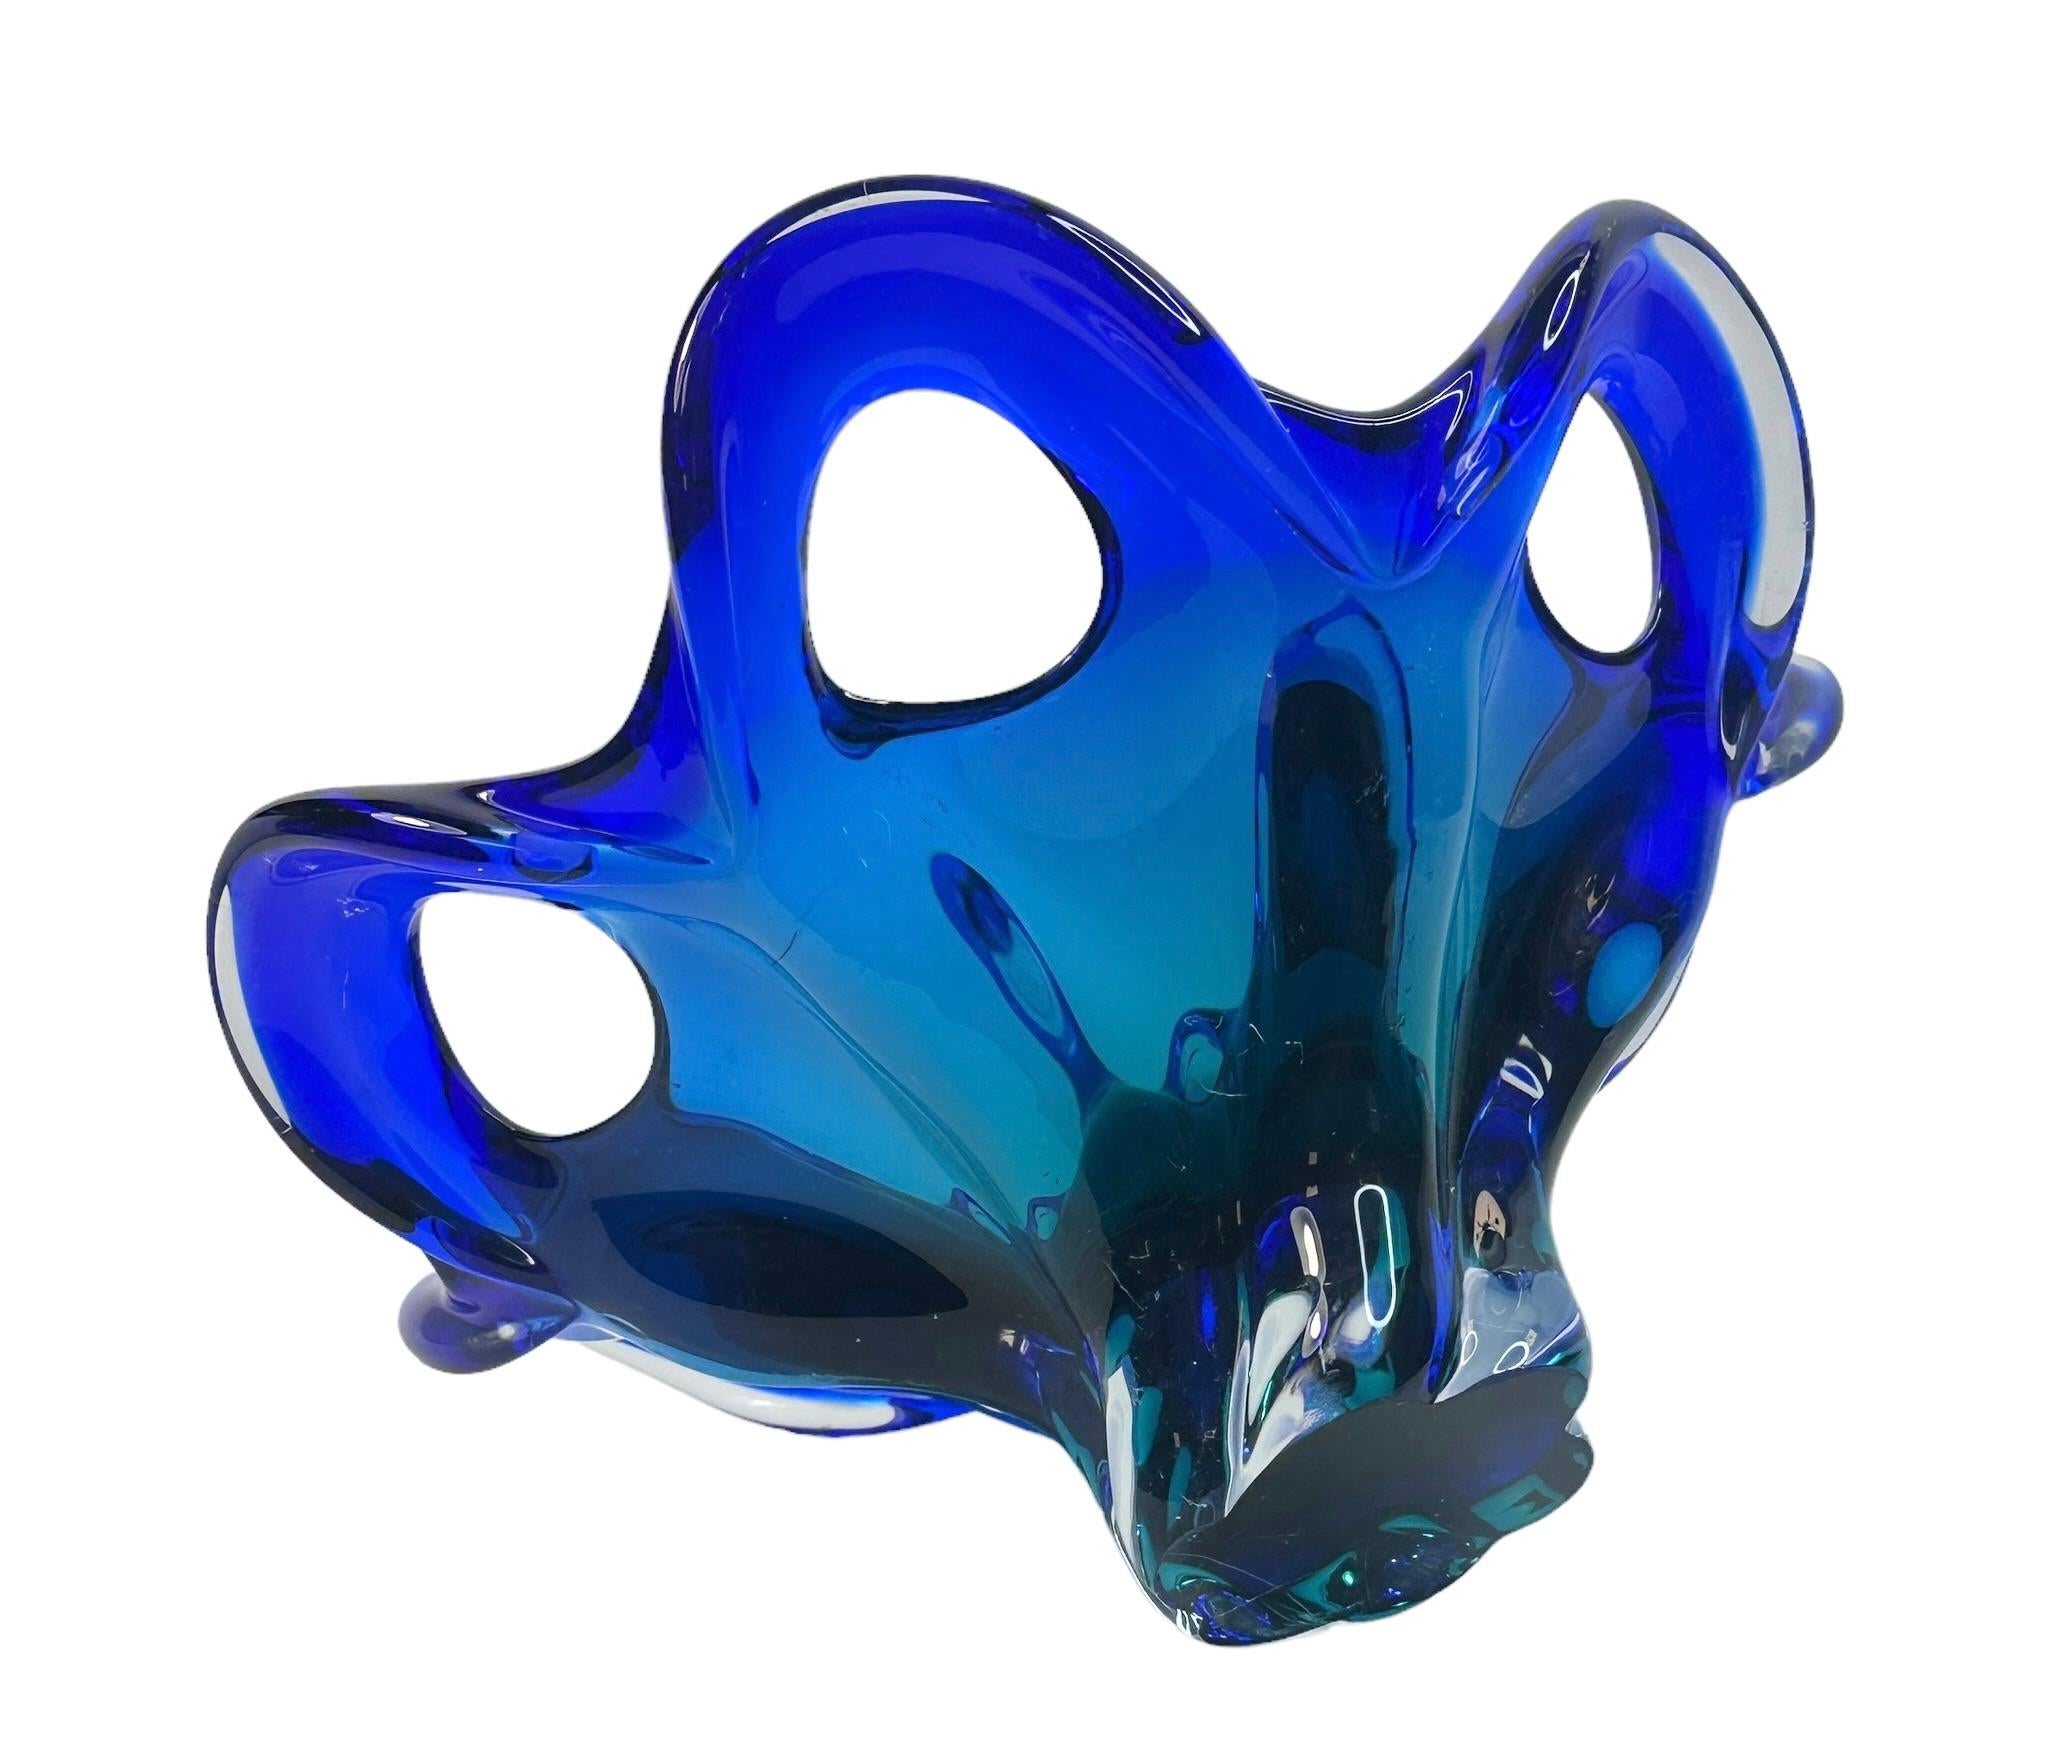 Stunning Murano Art Glass Bowl Catchall Blue and Clear, Vintage, Italy, 1970s For Sale 2